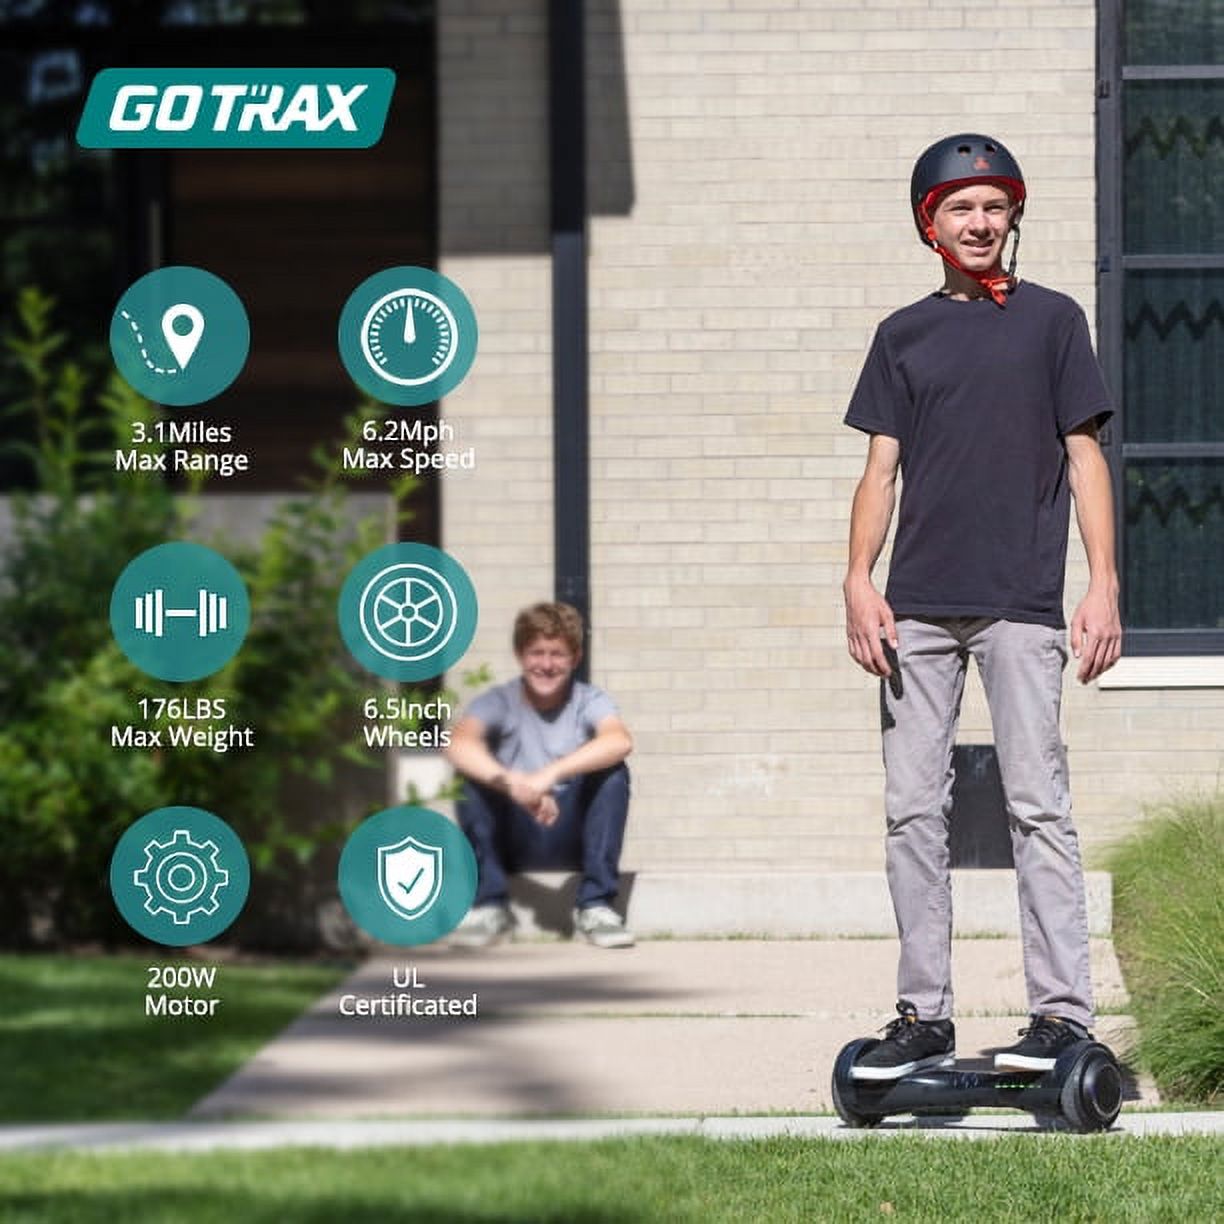 GOTRAX FX3 Hoverboard with 6.2 mph Max Speed, Self Balancing Scooter for 44-176lbs Kids Adults Black - image 5 of 9